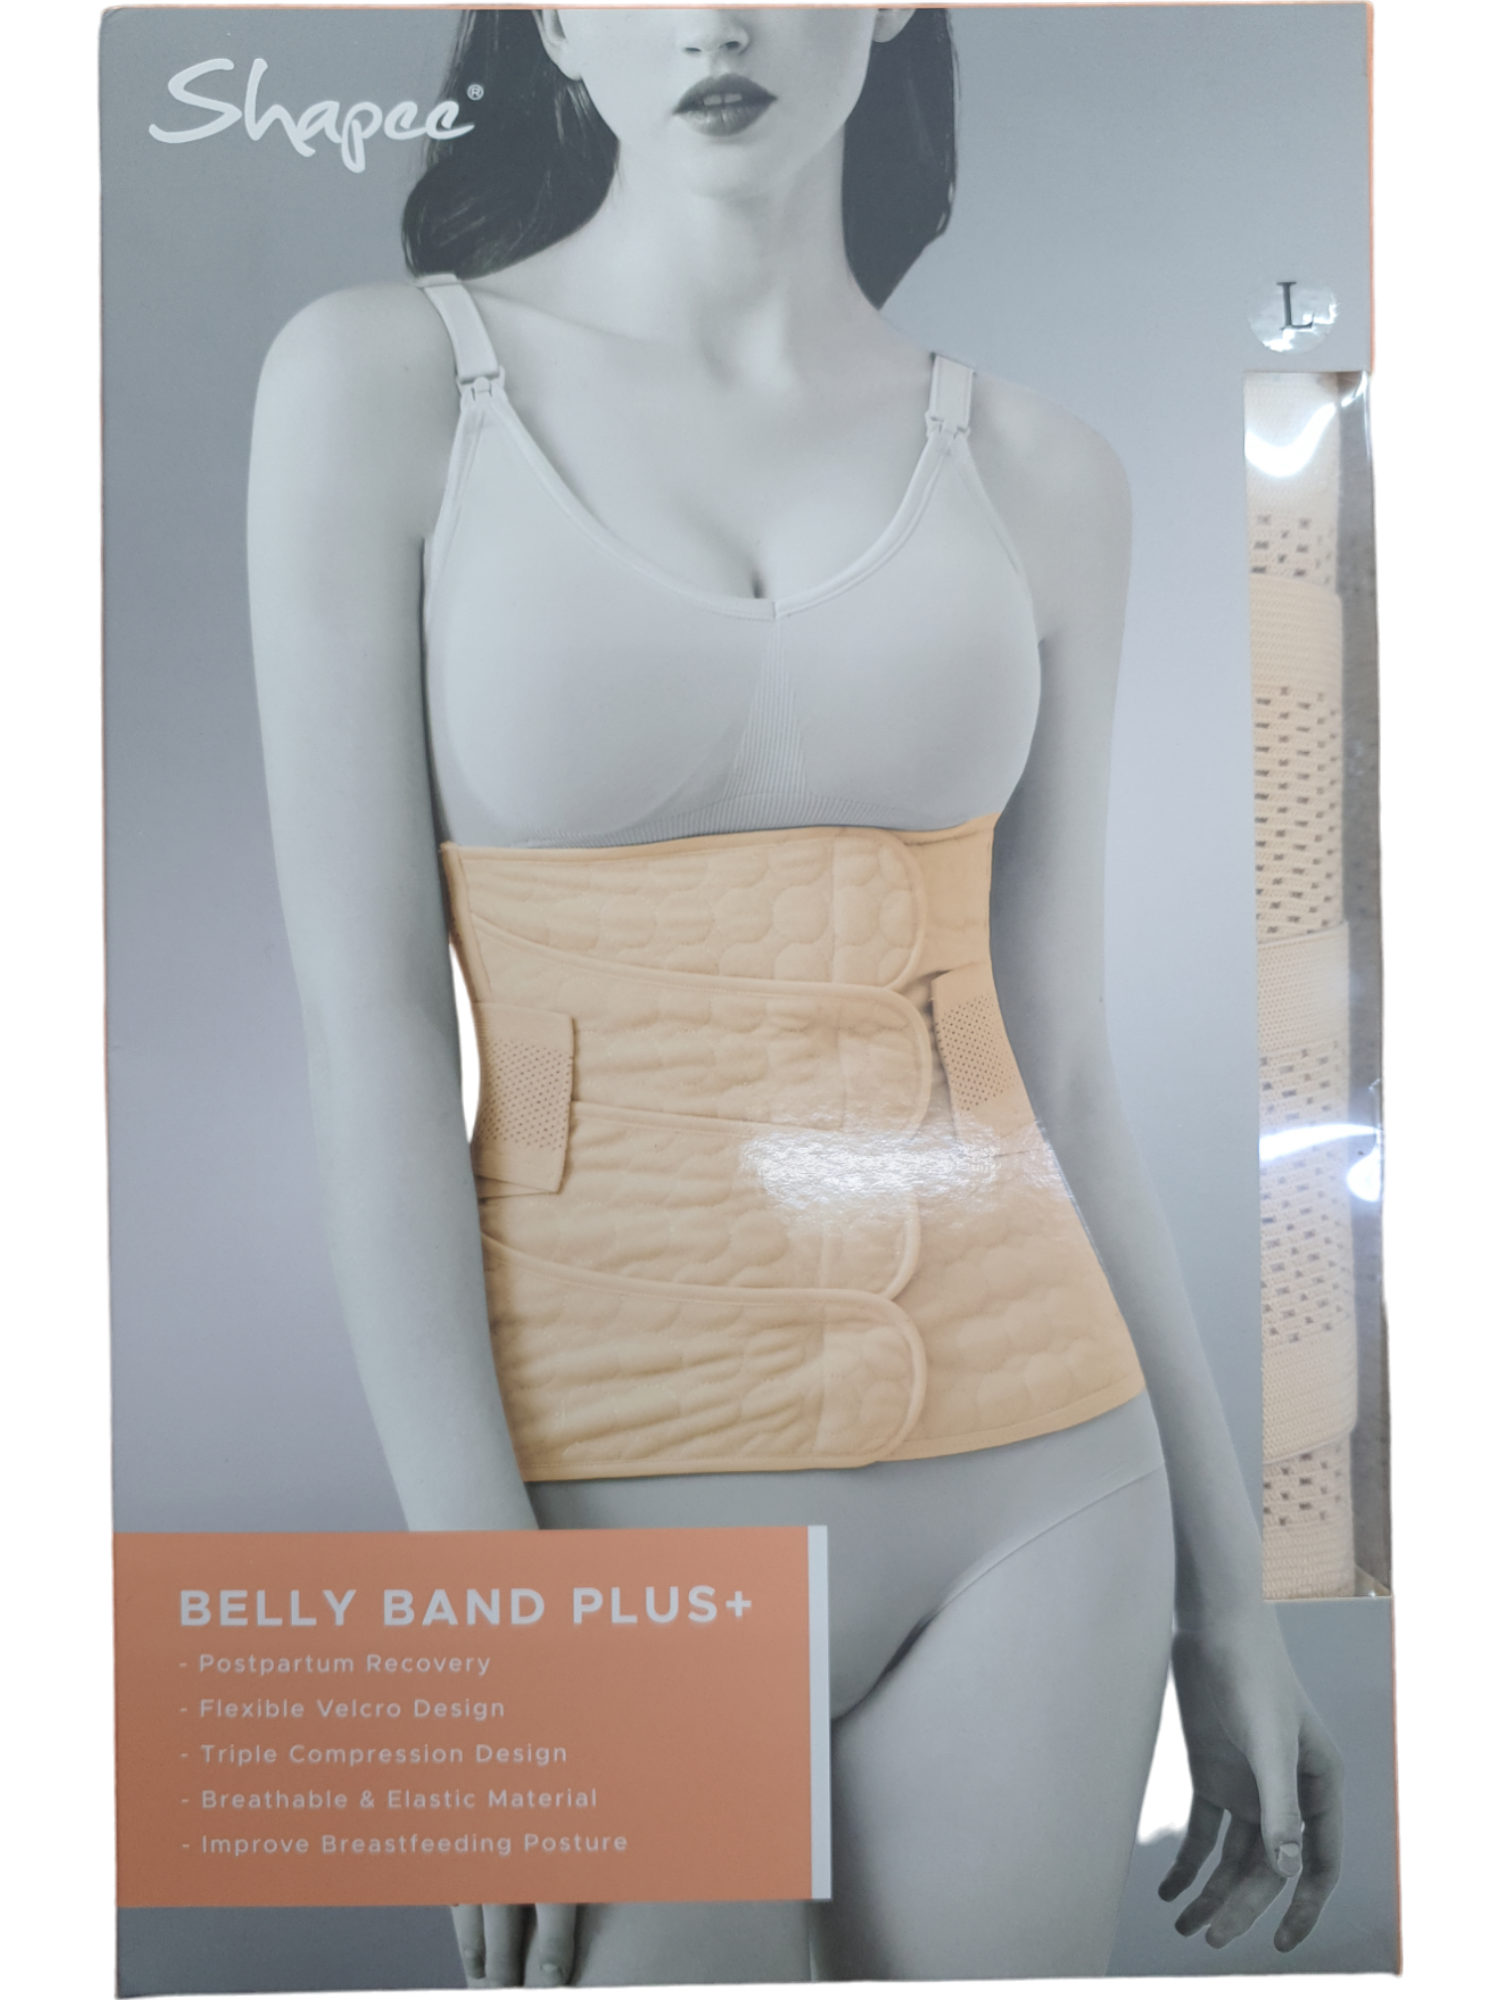 Shapee Belly Band Plus+ L